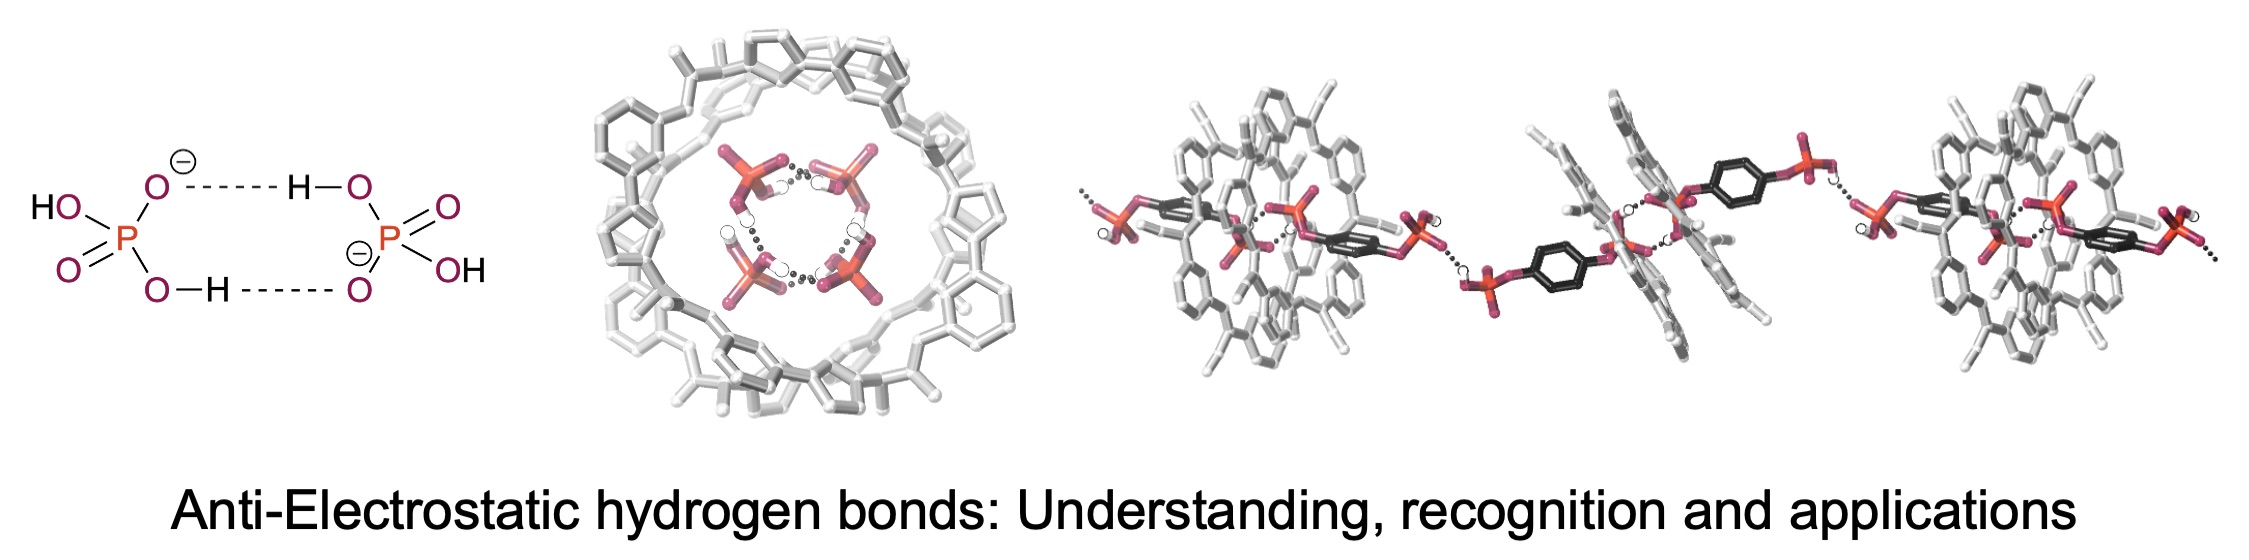 Recognition and Applications of Anion–Anion Dimers based on Anti-Electrostatic Hydrogen Bonds (AEHBs)